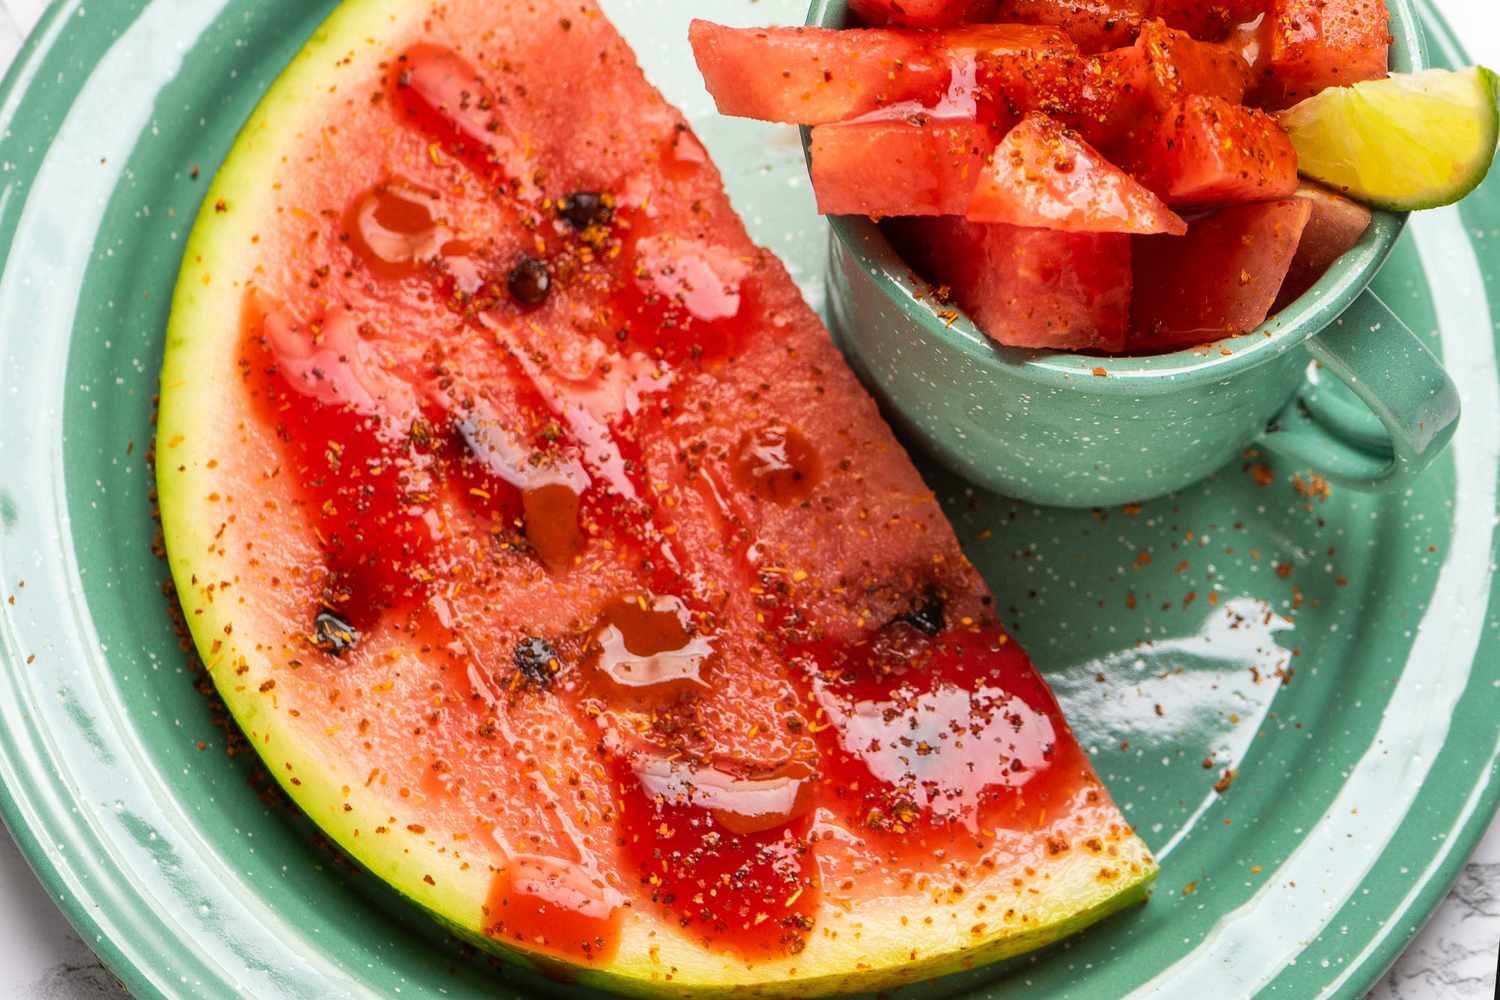 Watermelon with chili powder and hot sauce